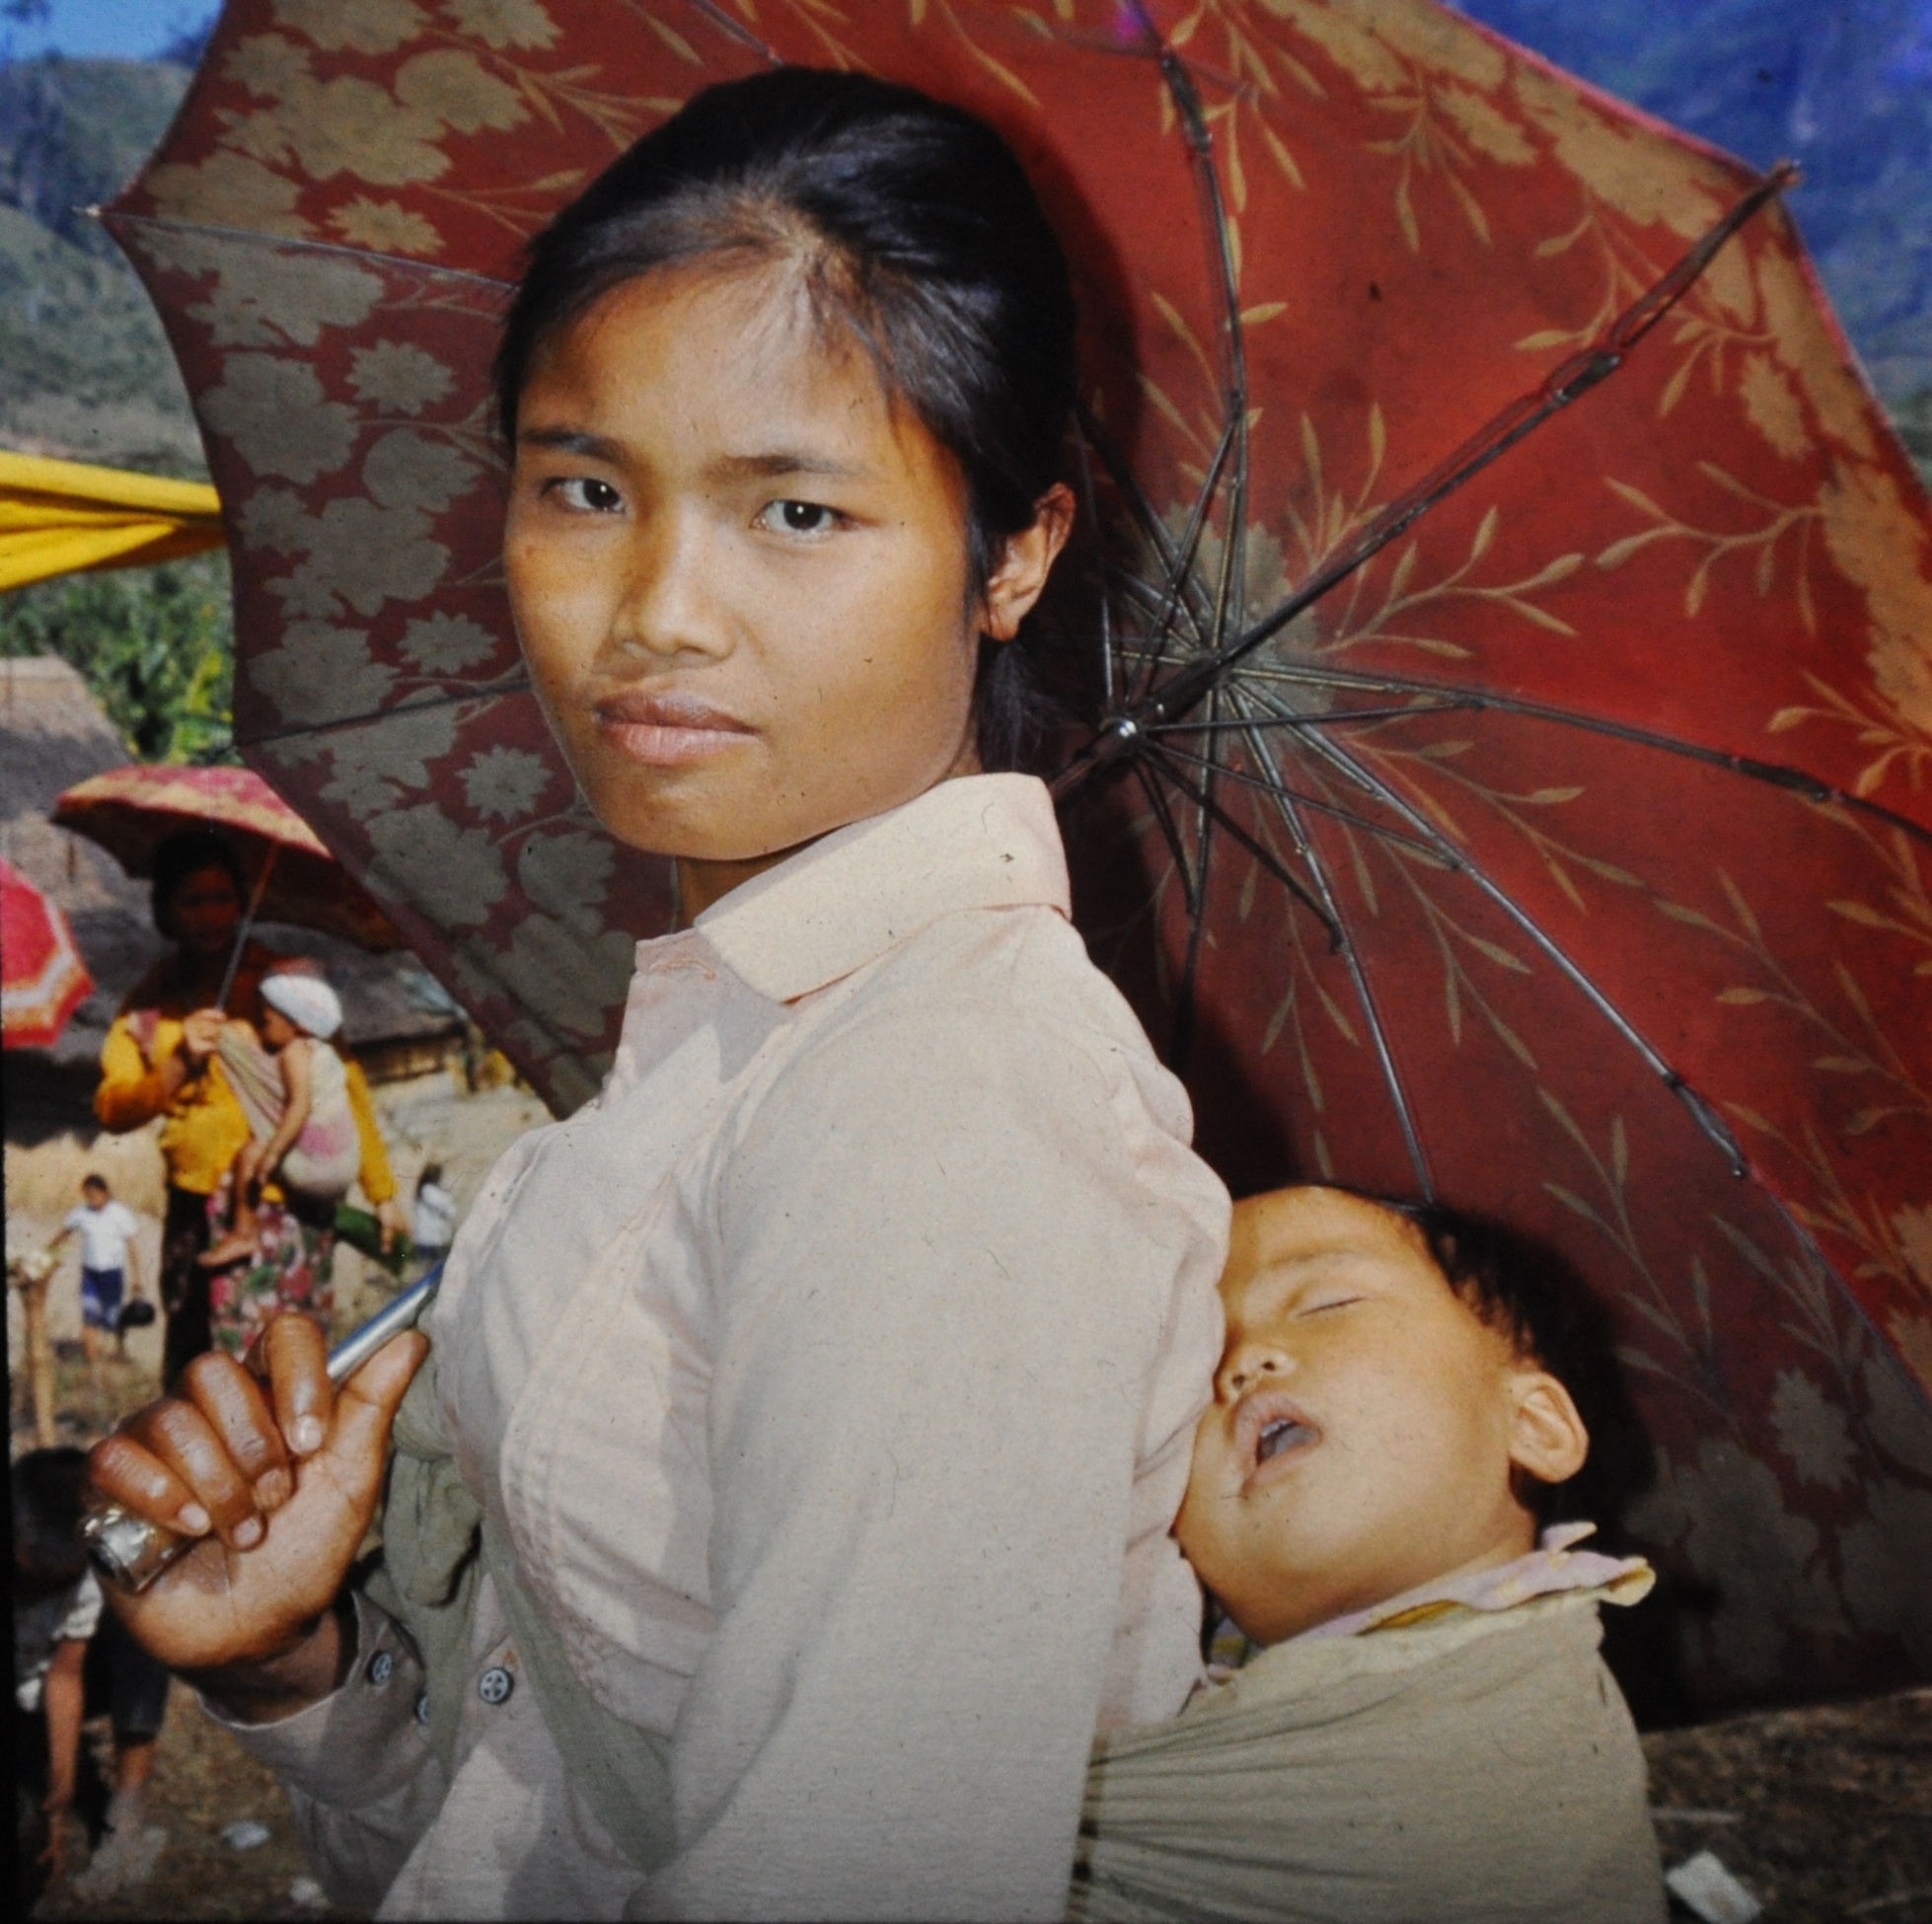 Lao refugee lady with child